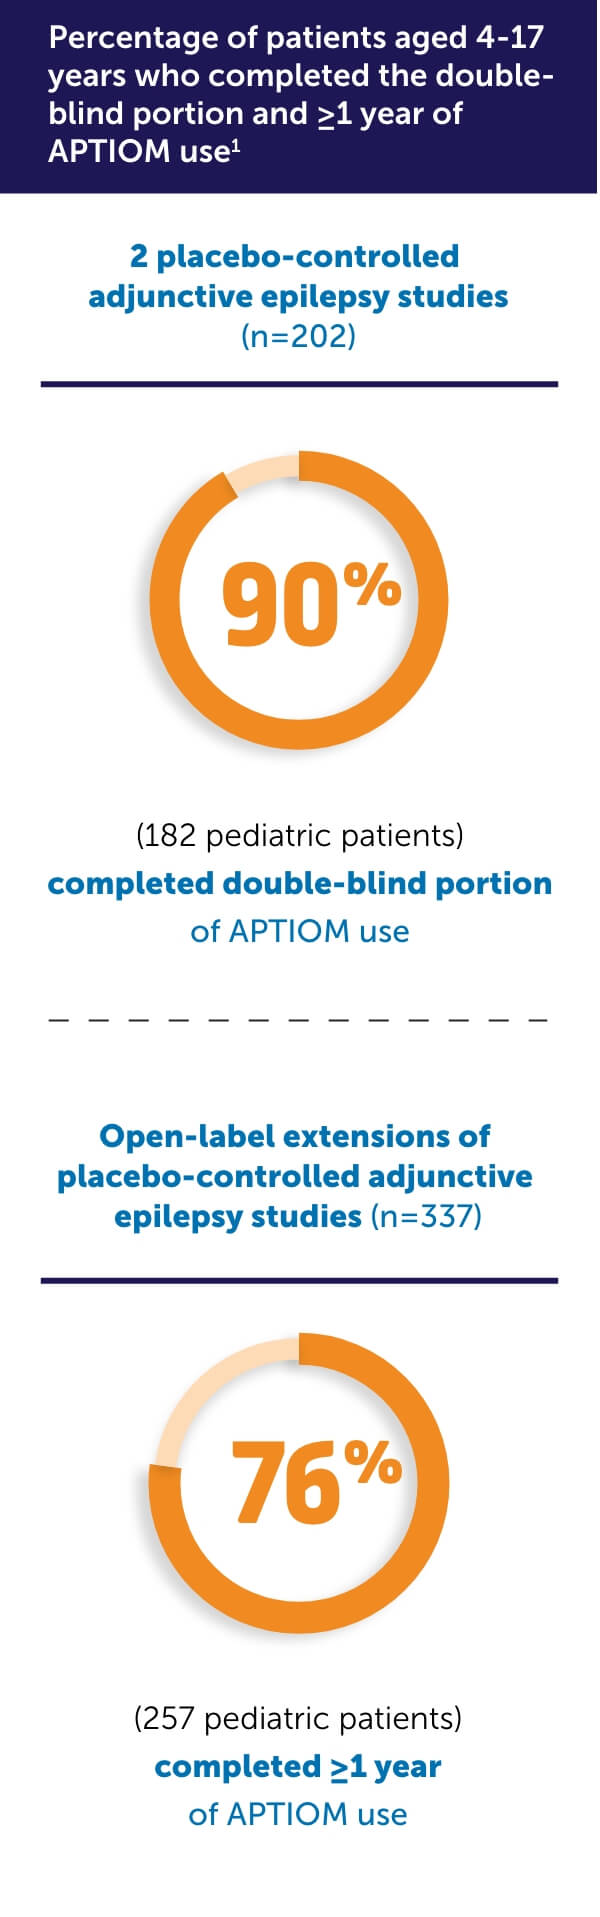 Percentage of patients aged 4-17 years who completed APTIOM adjunctive epilepsy studies. 90% completed the double-blind portion of APTIOM use. 76% completed ≥1 year of open-label extensions of APTIOM use 